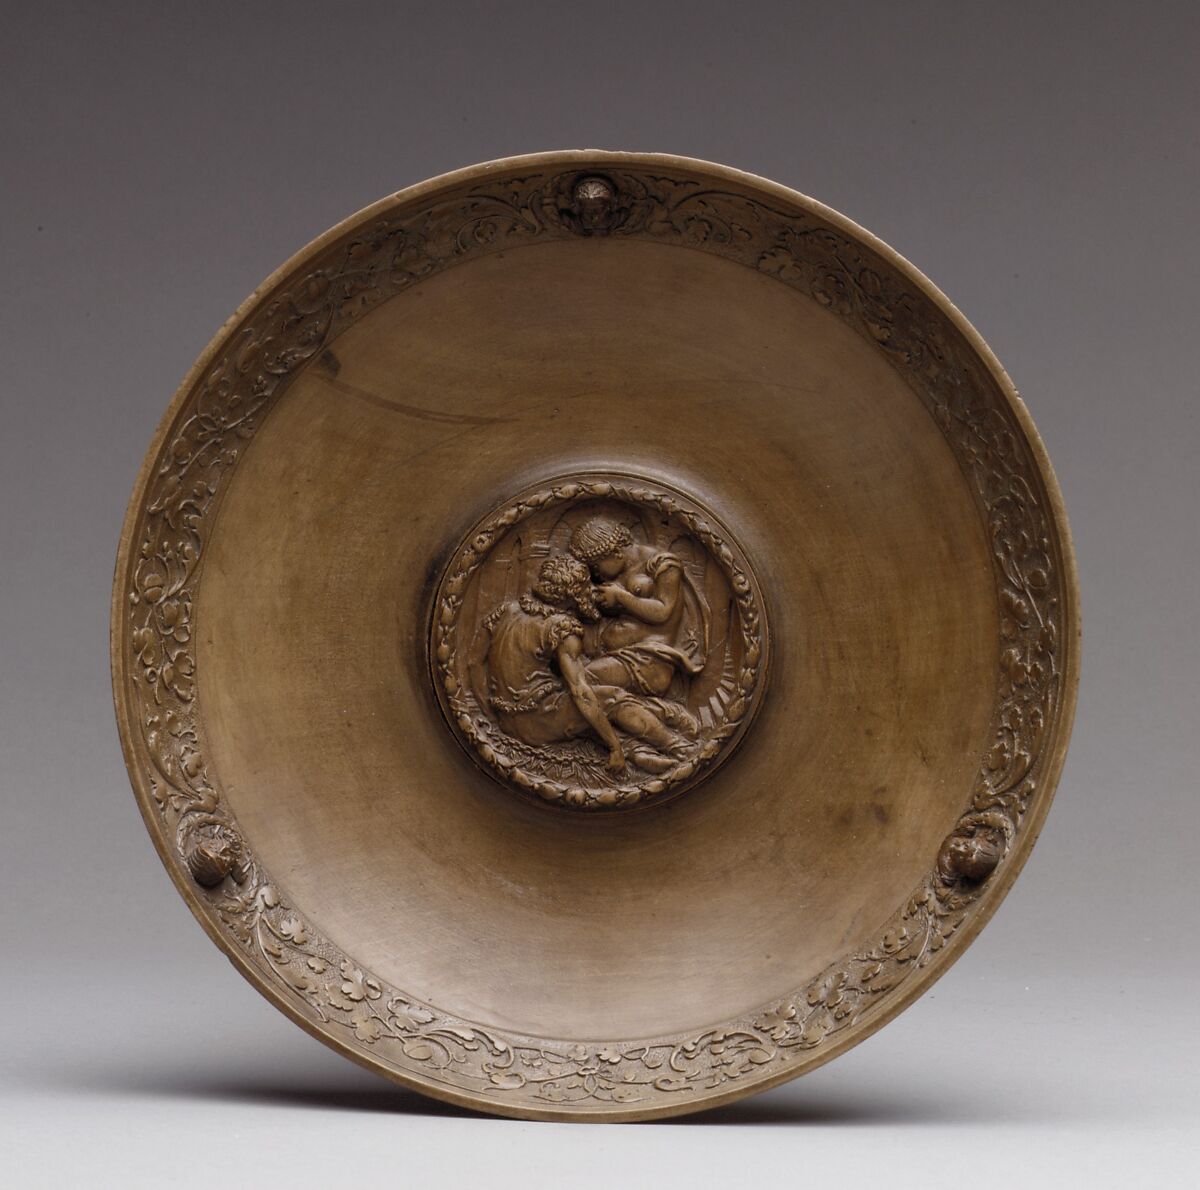 Goldsmith's model for a bowl with a representation of Roman Charity, Said to be based on a design by Sebald Beham (German, Nuremberg 1500–1550 Frankfurt), Boxwood and fruitwood, possibly Southern German, Nuremberg 